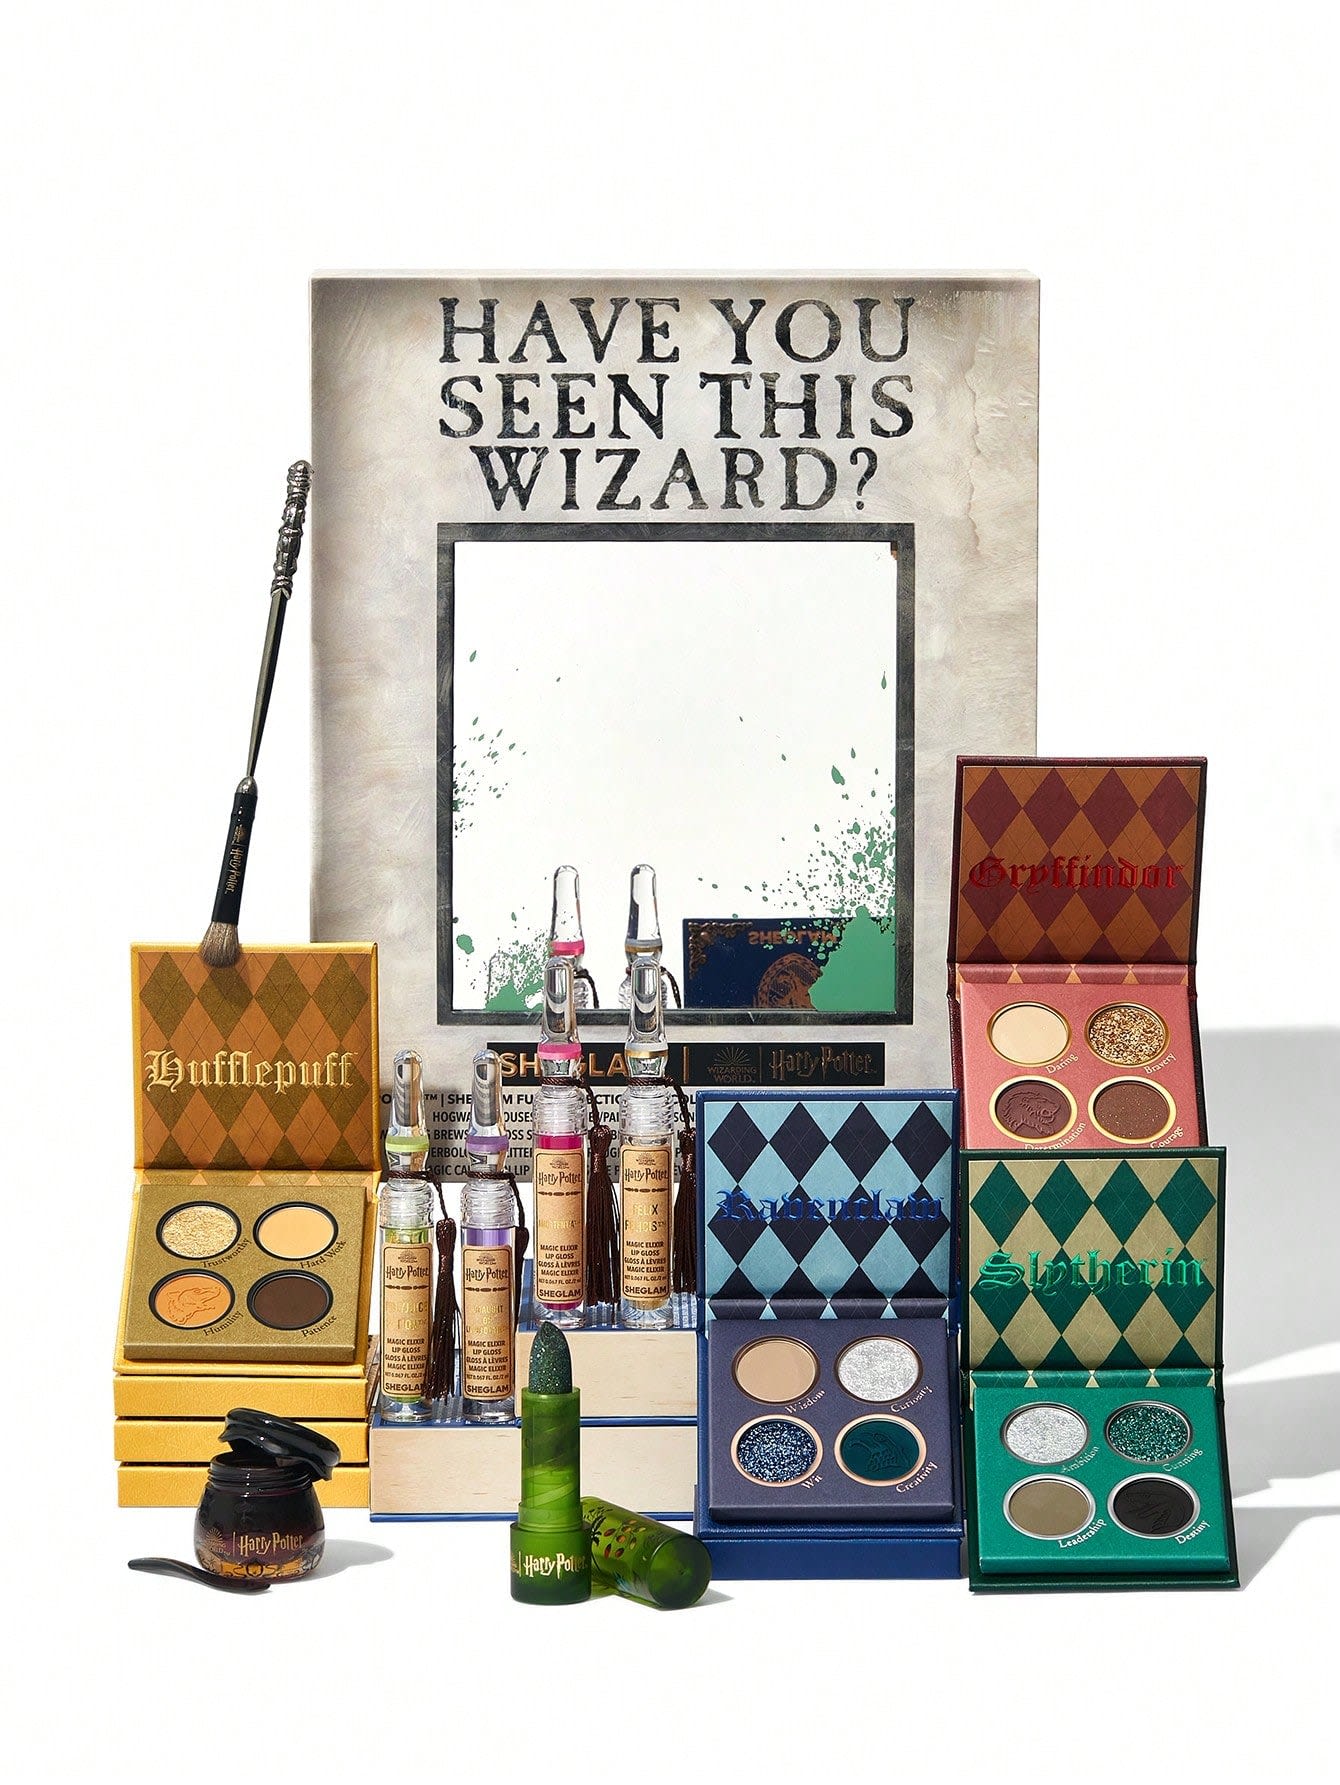 50 Best Harry Potter Gift Ideas for Kids and Adults 2024